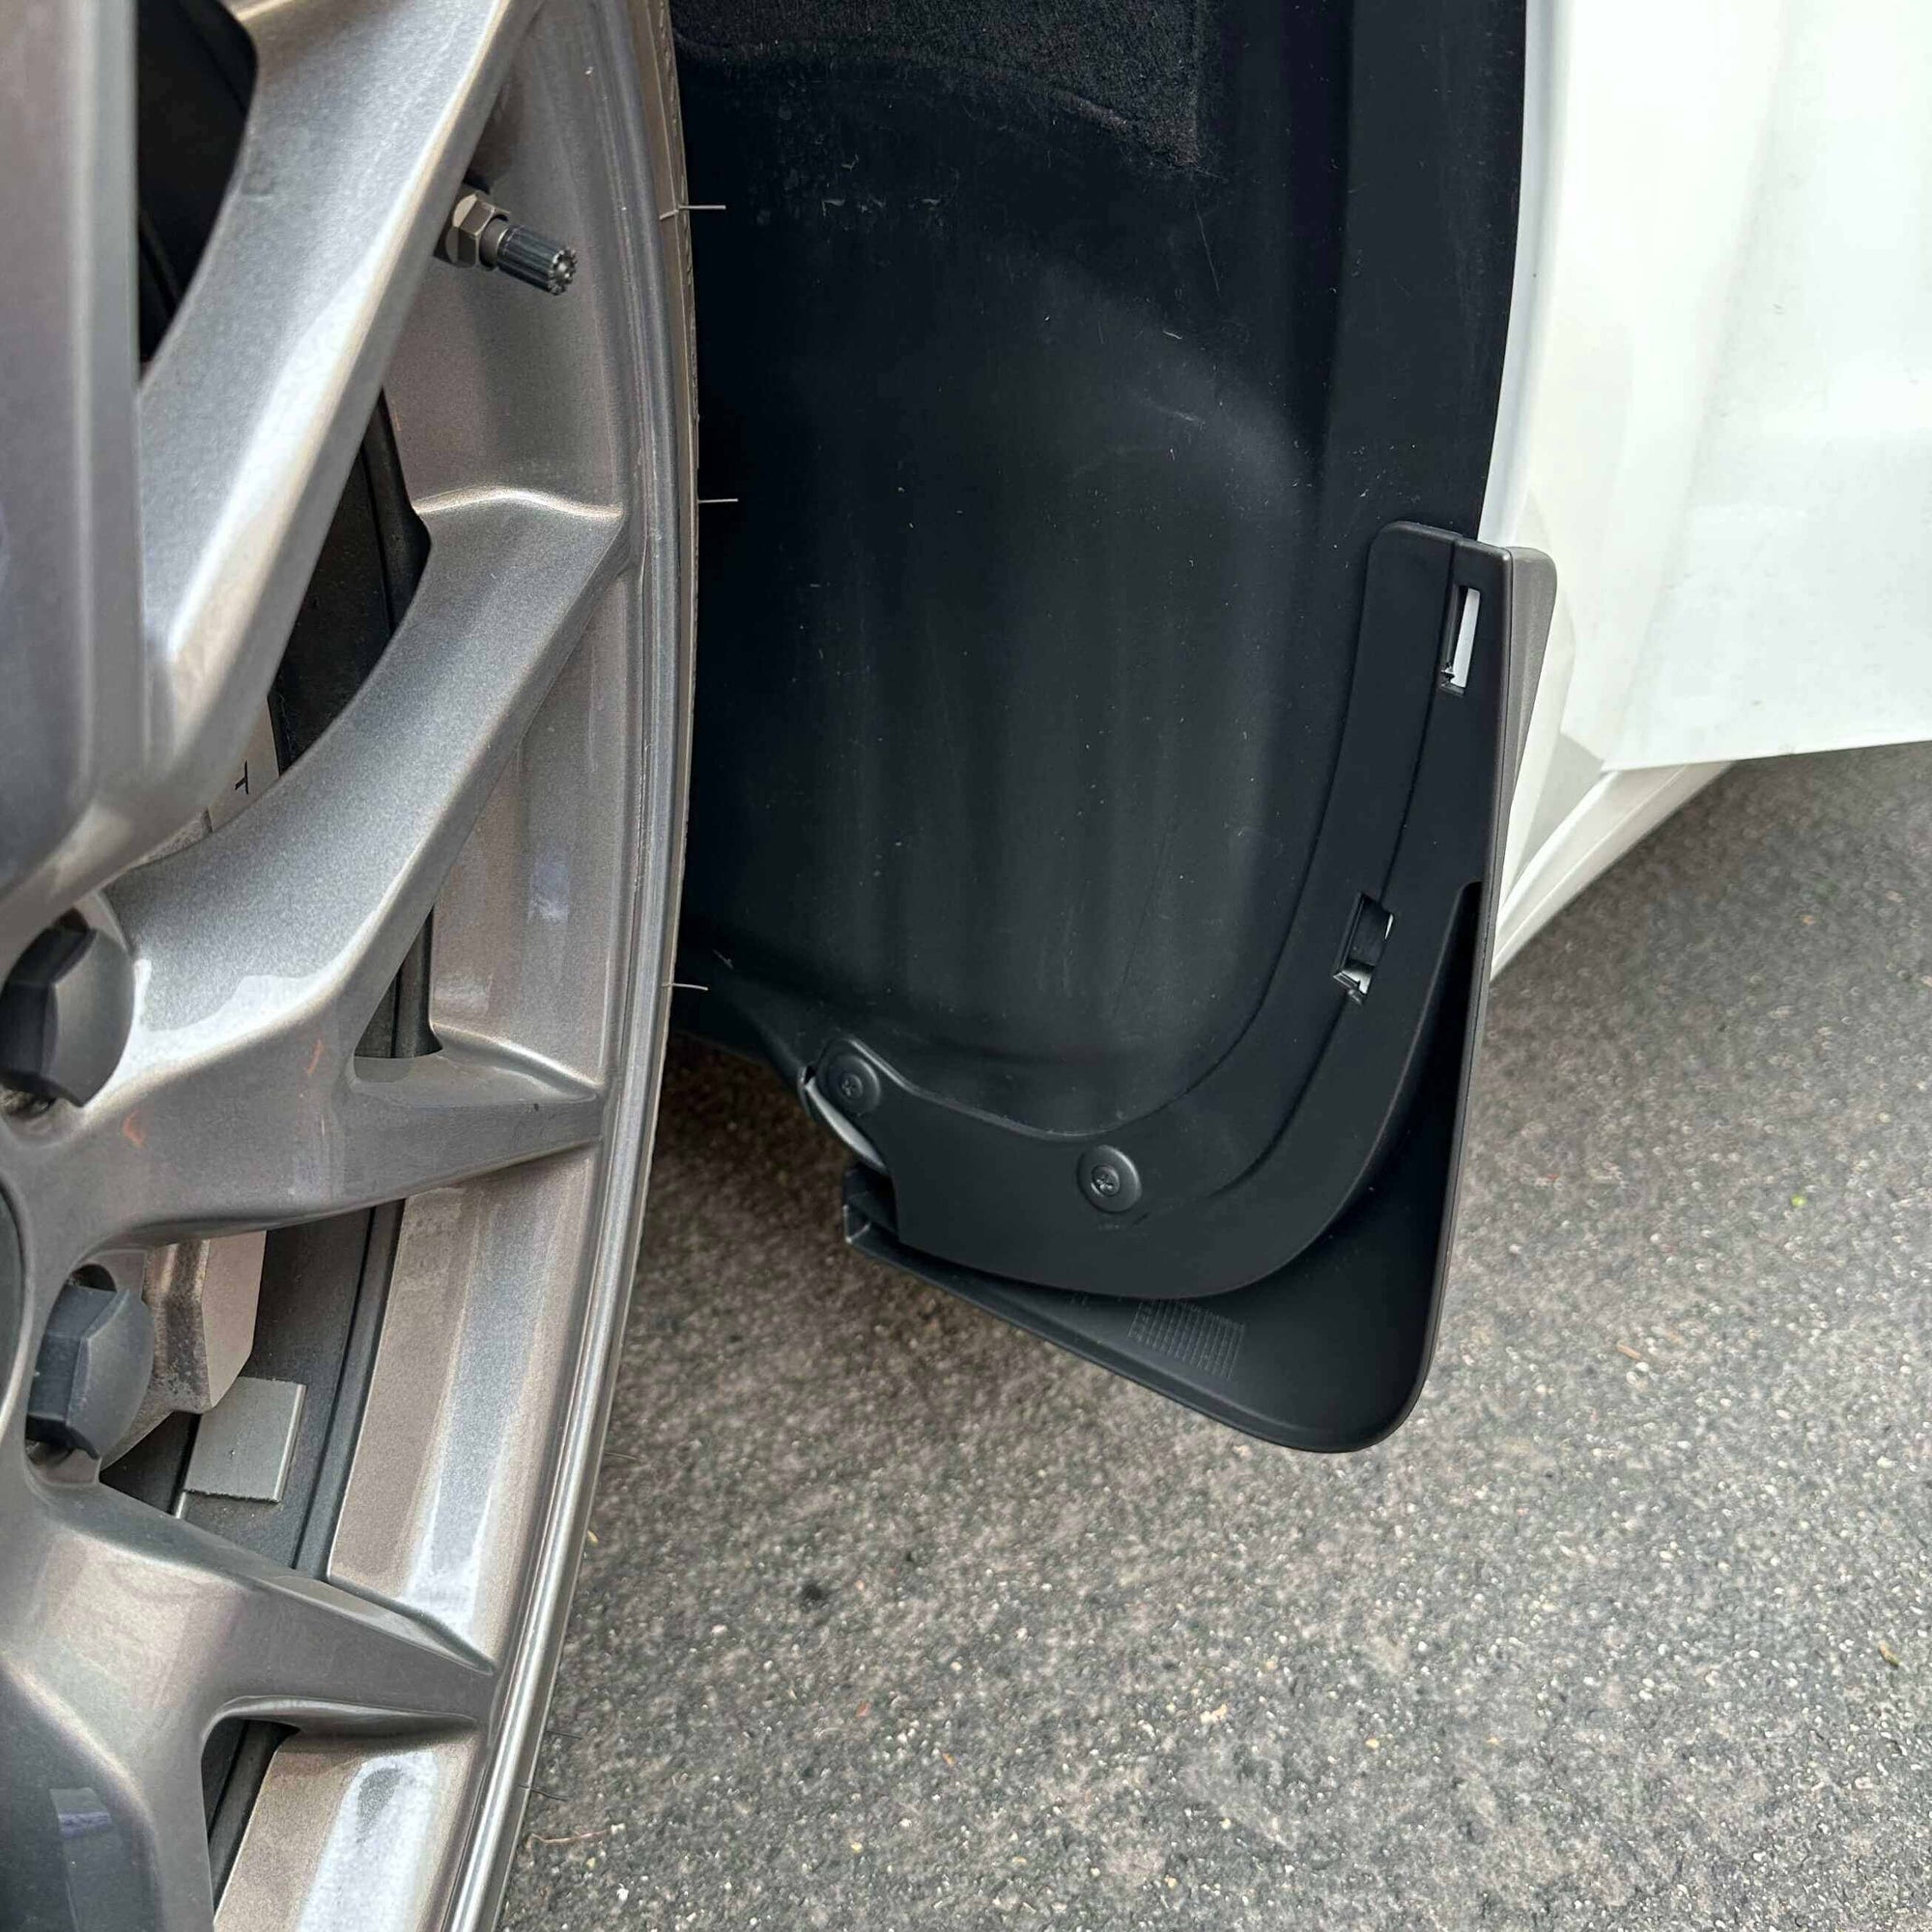 Lasfit Mud Flaps for Tesla Model 3 2017-2023 No Drilling Required Splash Guards Matte Fender Upgraded PP Material Accessories Fit 5 Seater Car - Set